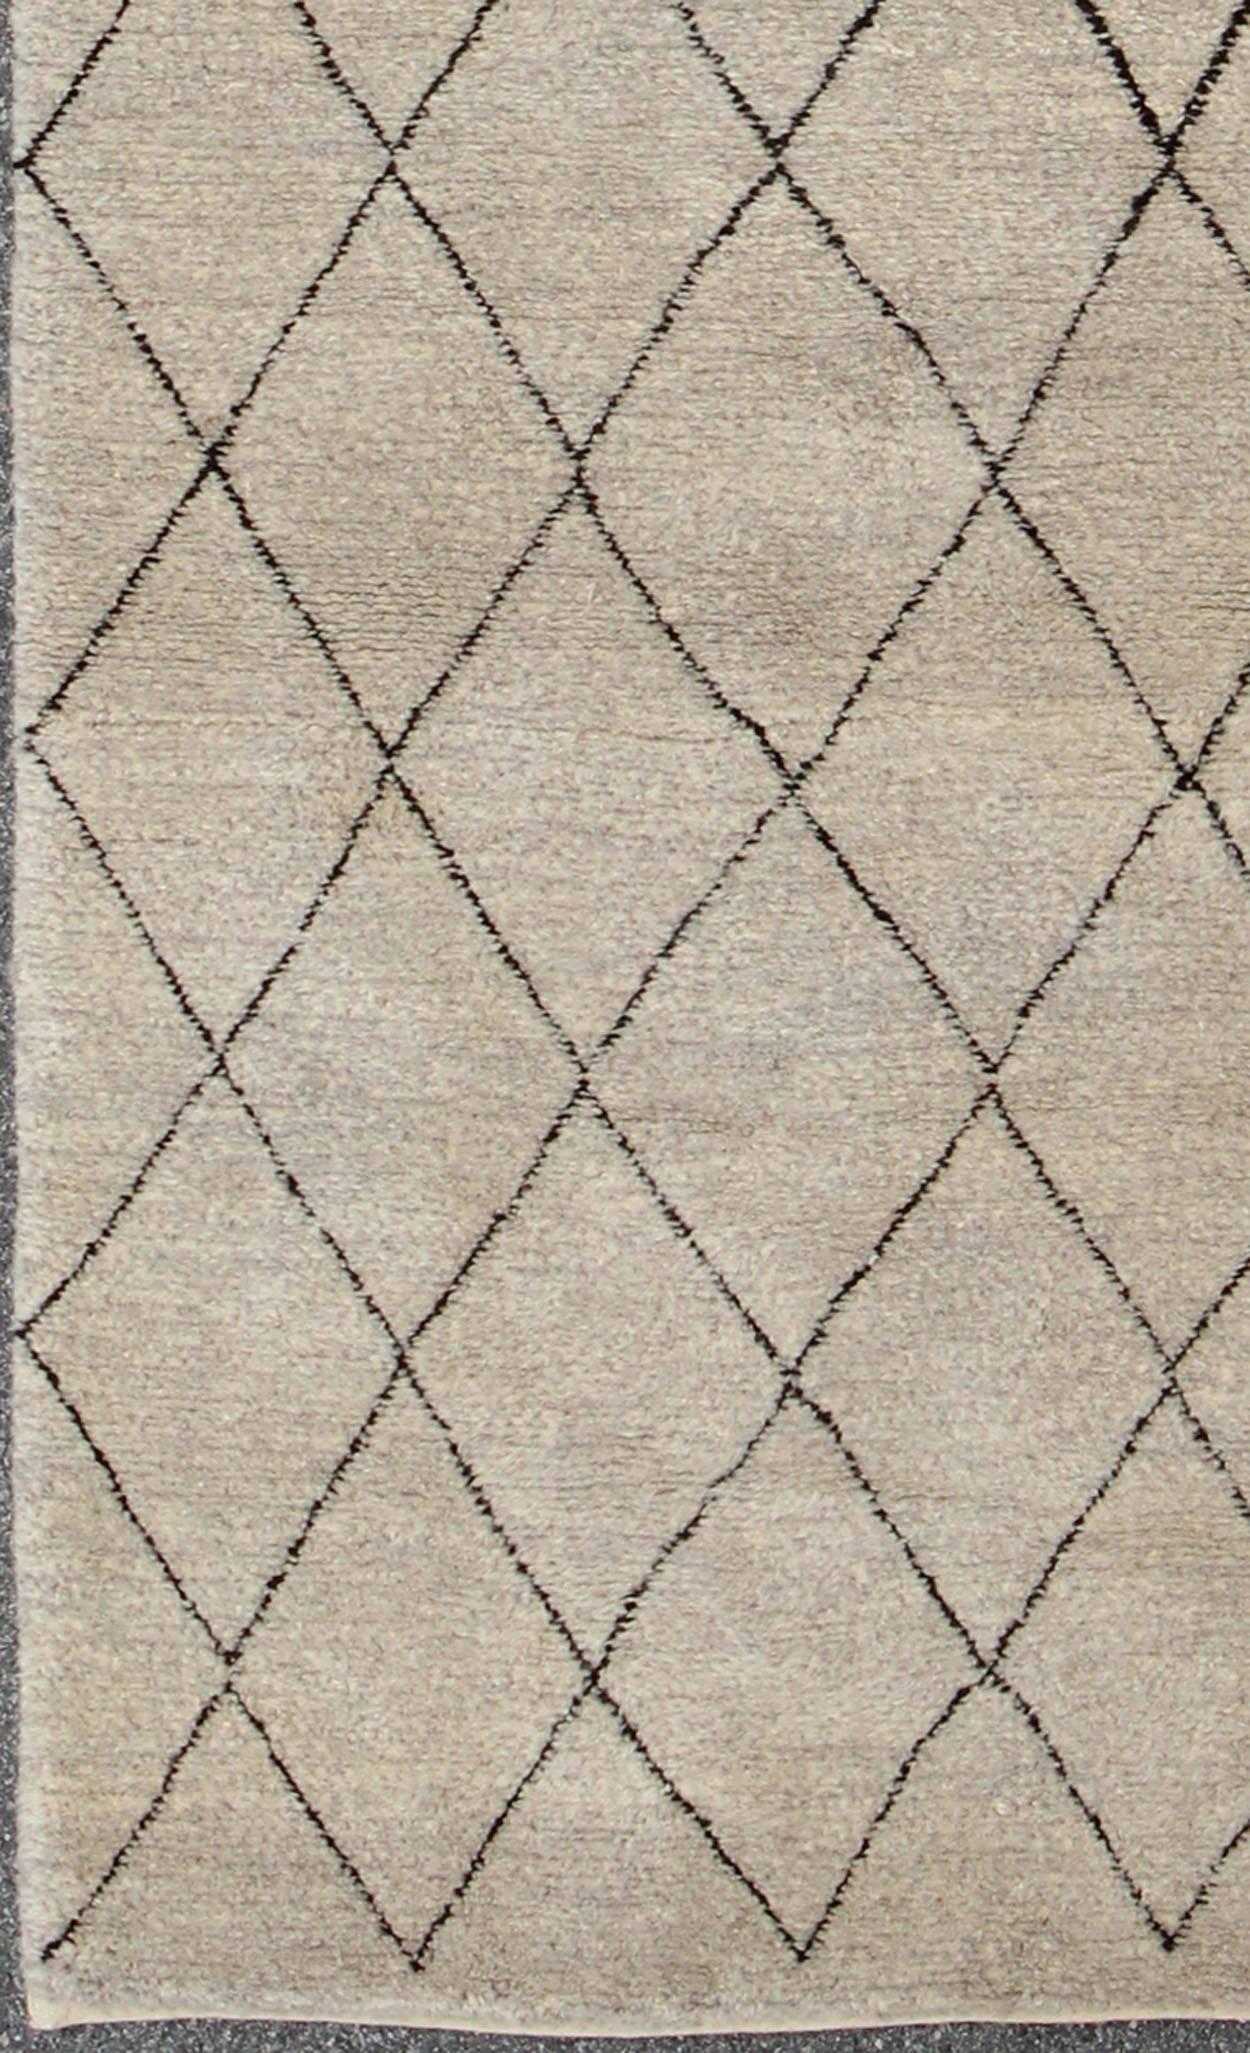 Long contemporary Moroccan runner vintage with brown and ivory diamond pattern, rug 17-0902, country of origin / type: Morocco / Moroccan,

This tribal, vintage 1980s Moroccan runner features a thin brown diamond/lattice pattern woven on an ivory